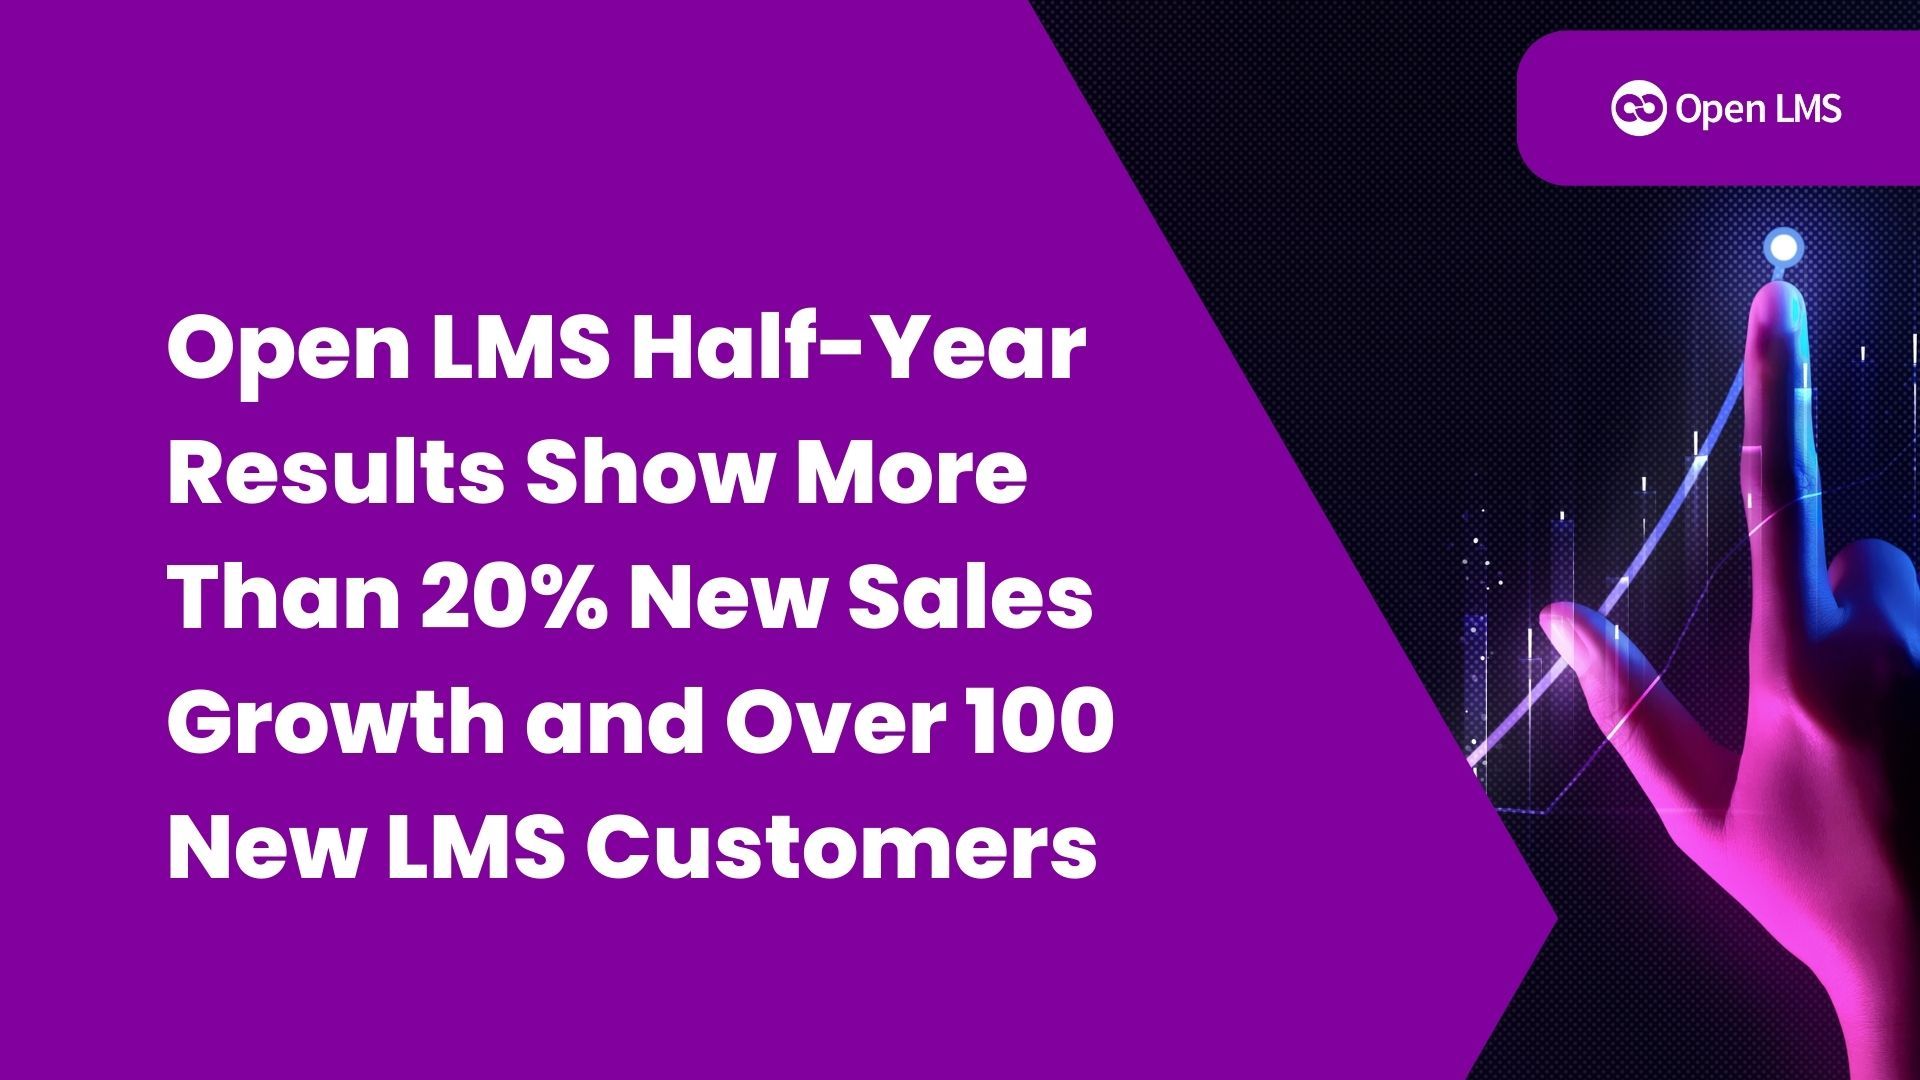 Open LMS Half-Year Results Show More Than 20% New Sales Growth and Over 100 New LMS Customers